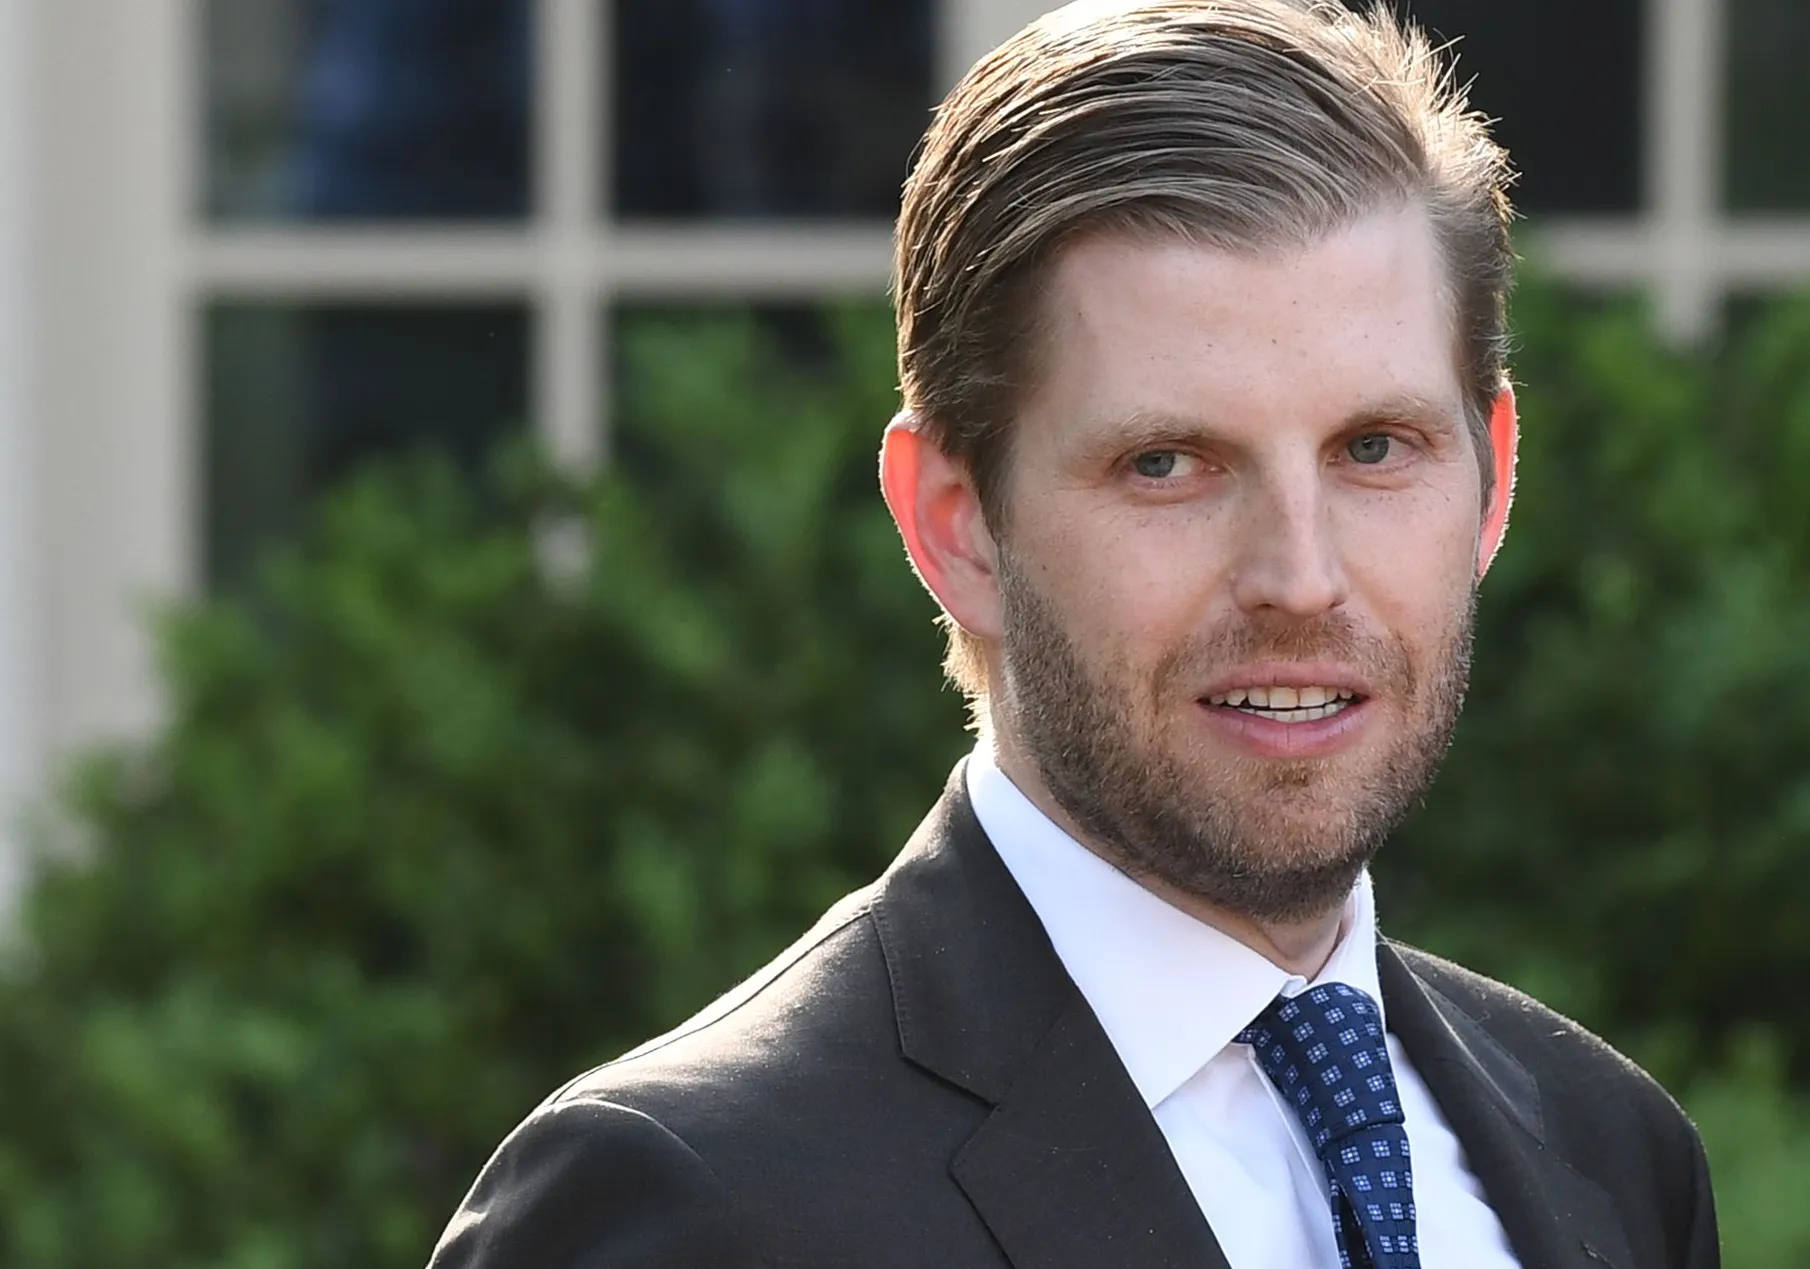 21-captivating-facts-about-eric-trump